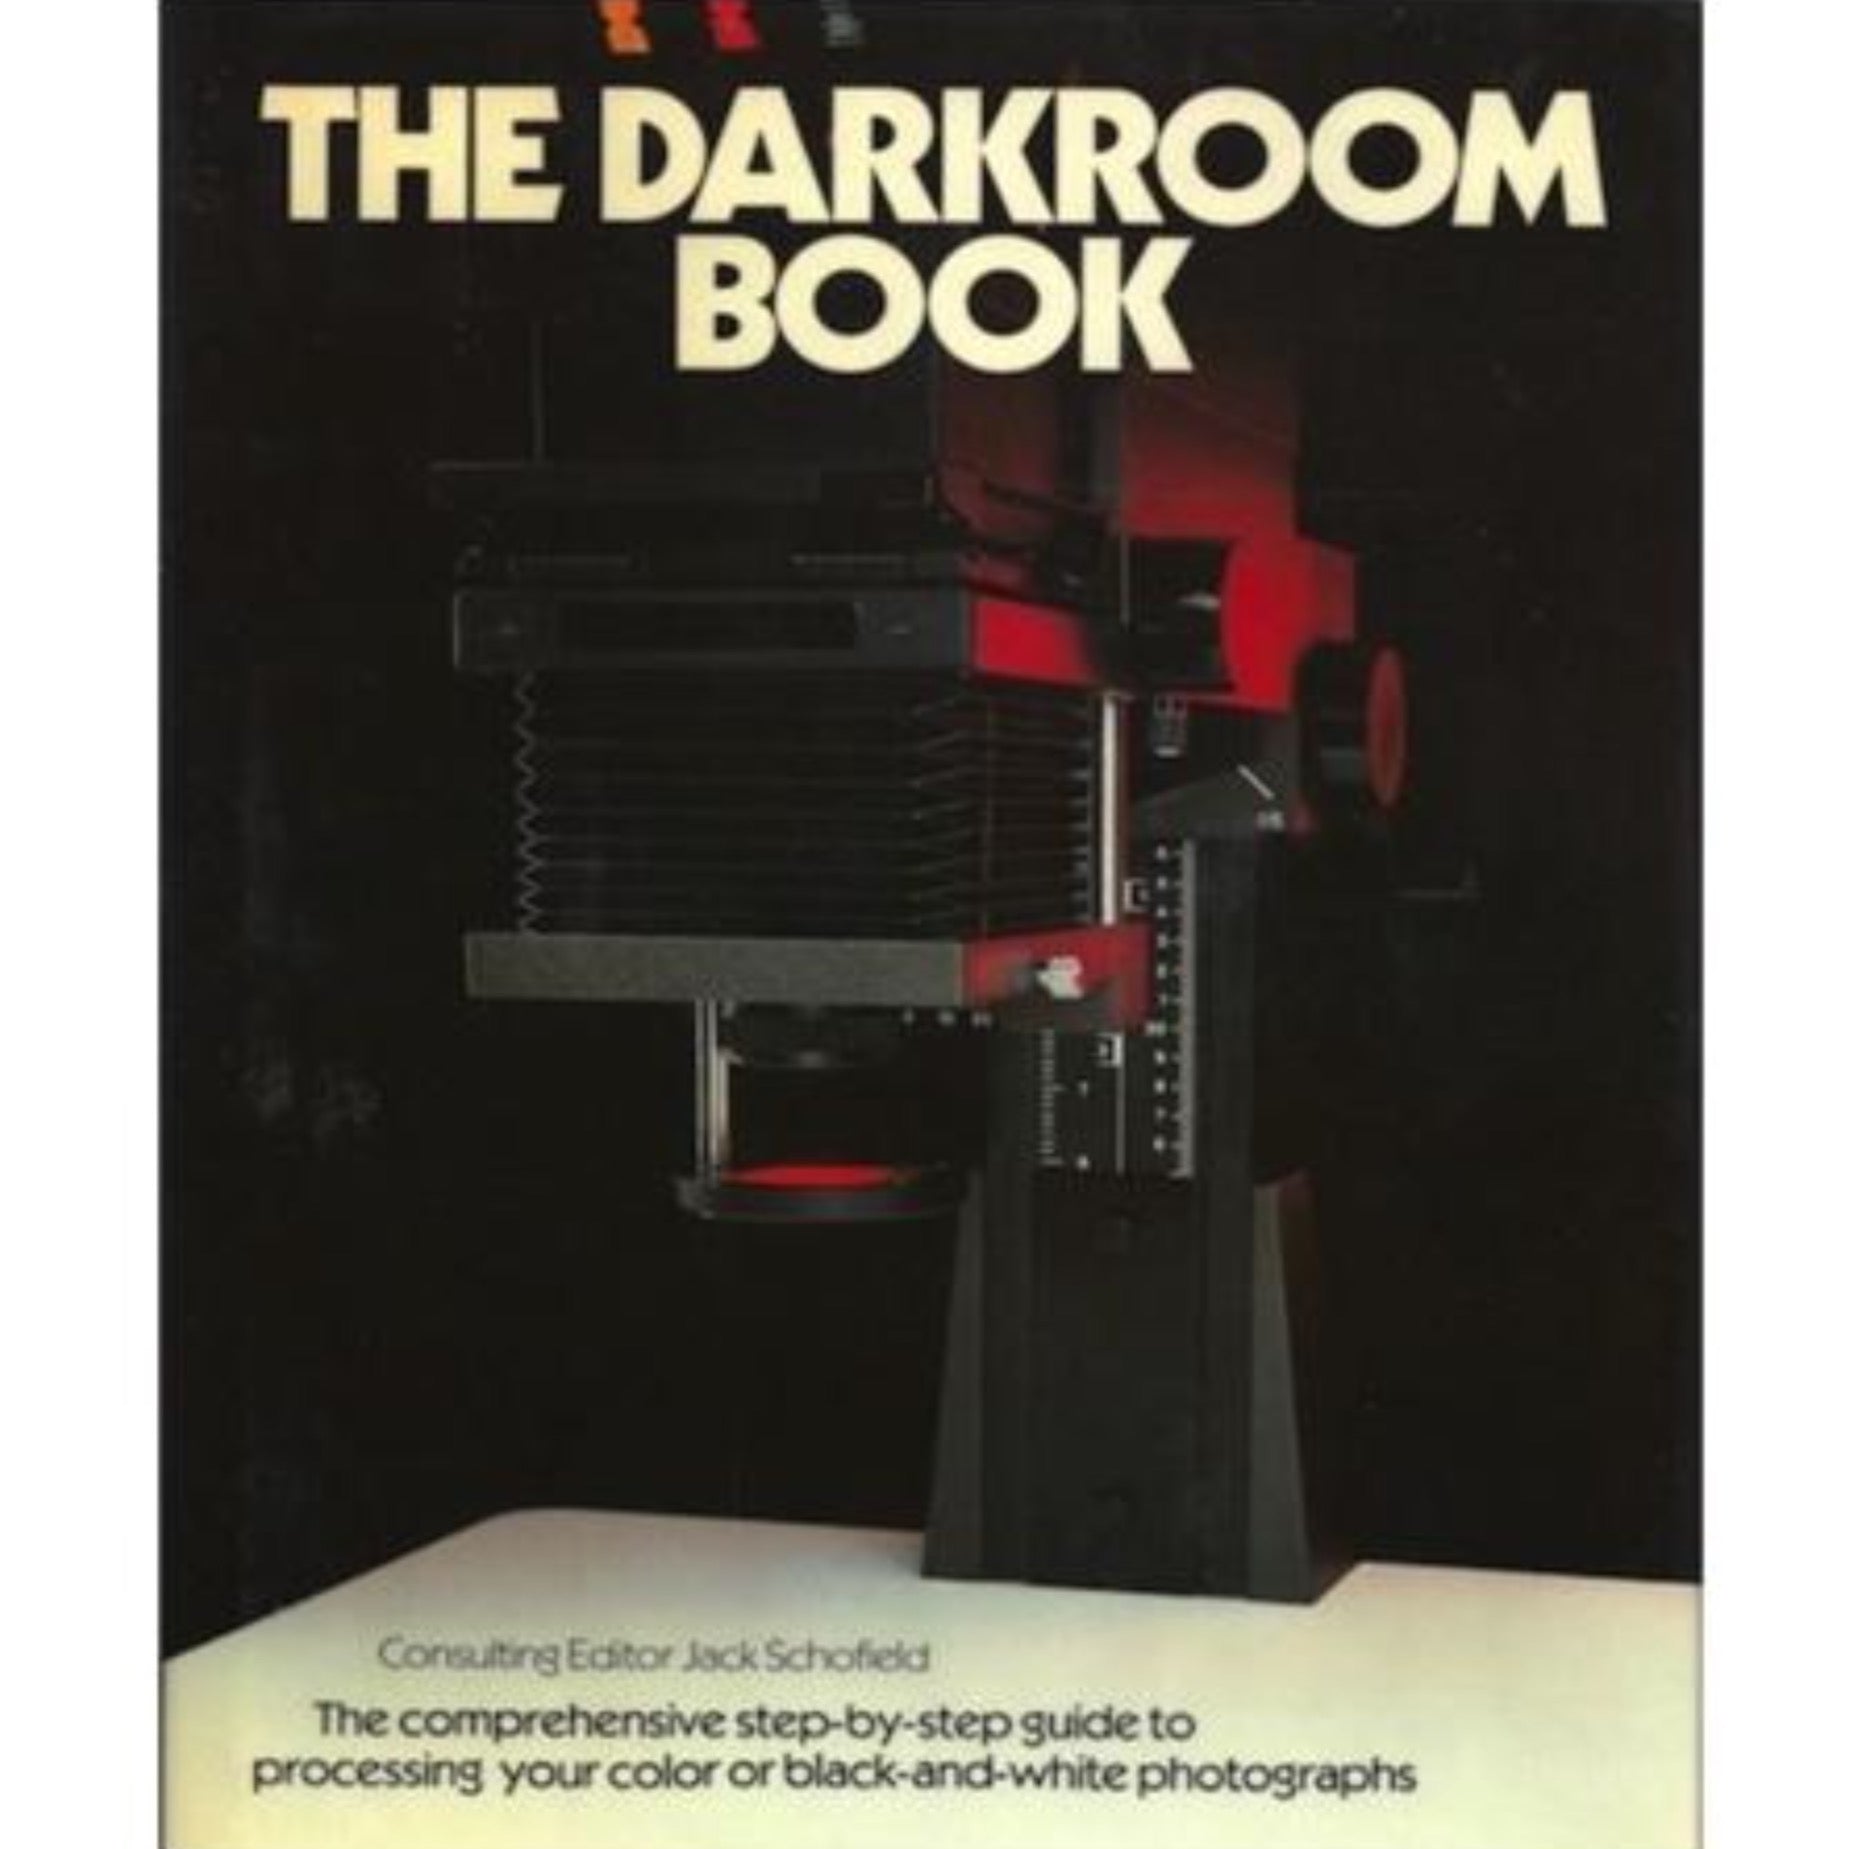 Jack Schofield's THE DARKROOM BOOK: Comprehensive Step-by-Step Guide - American Photographic Publishing